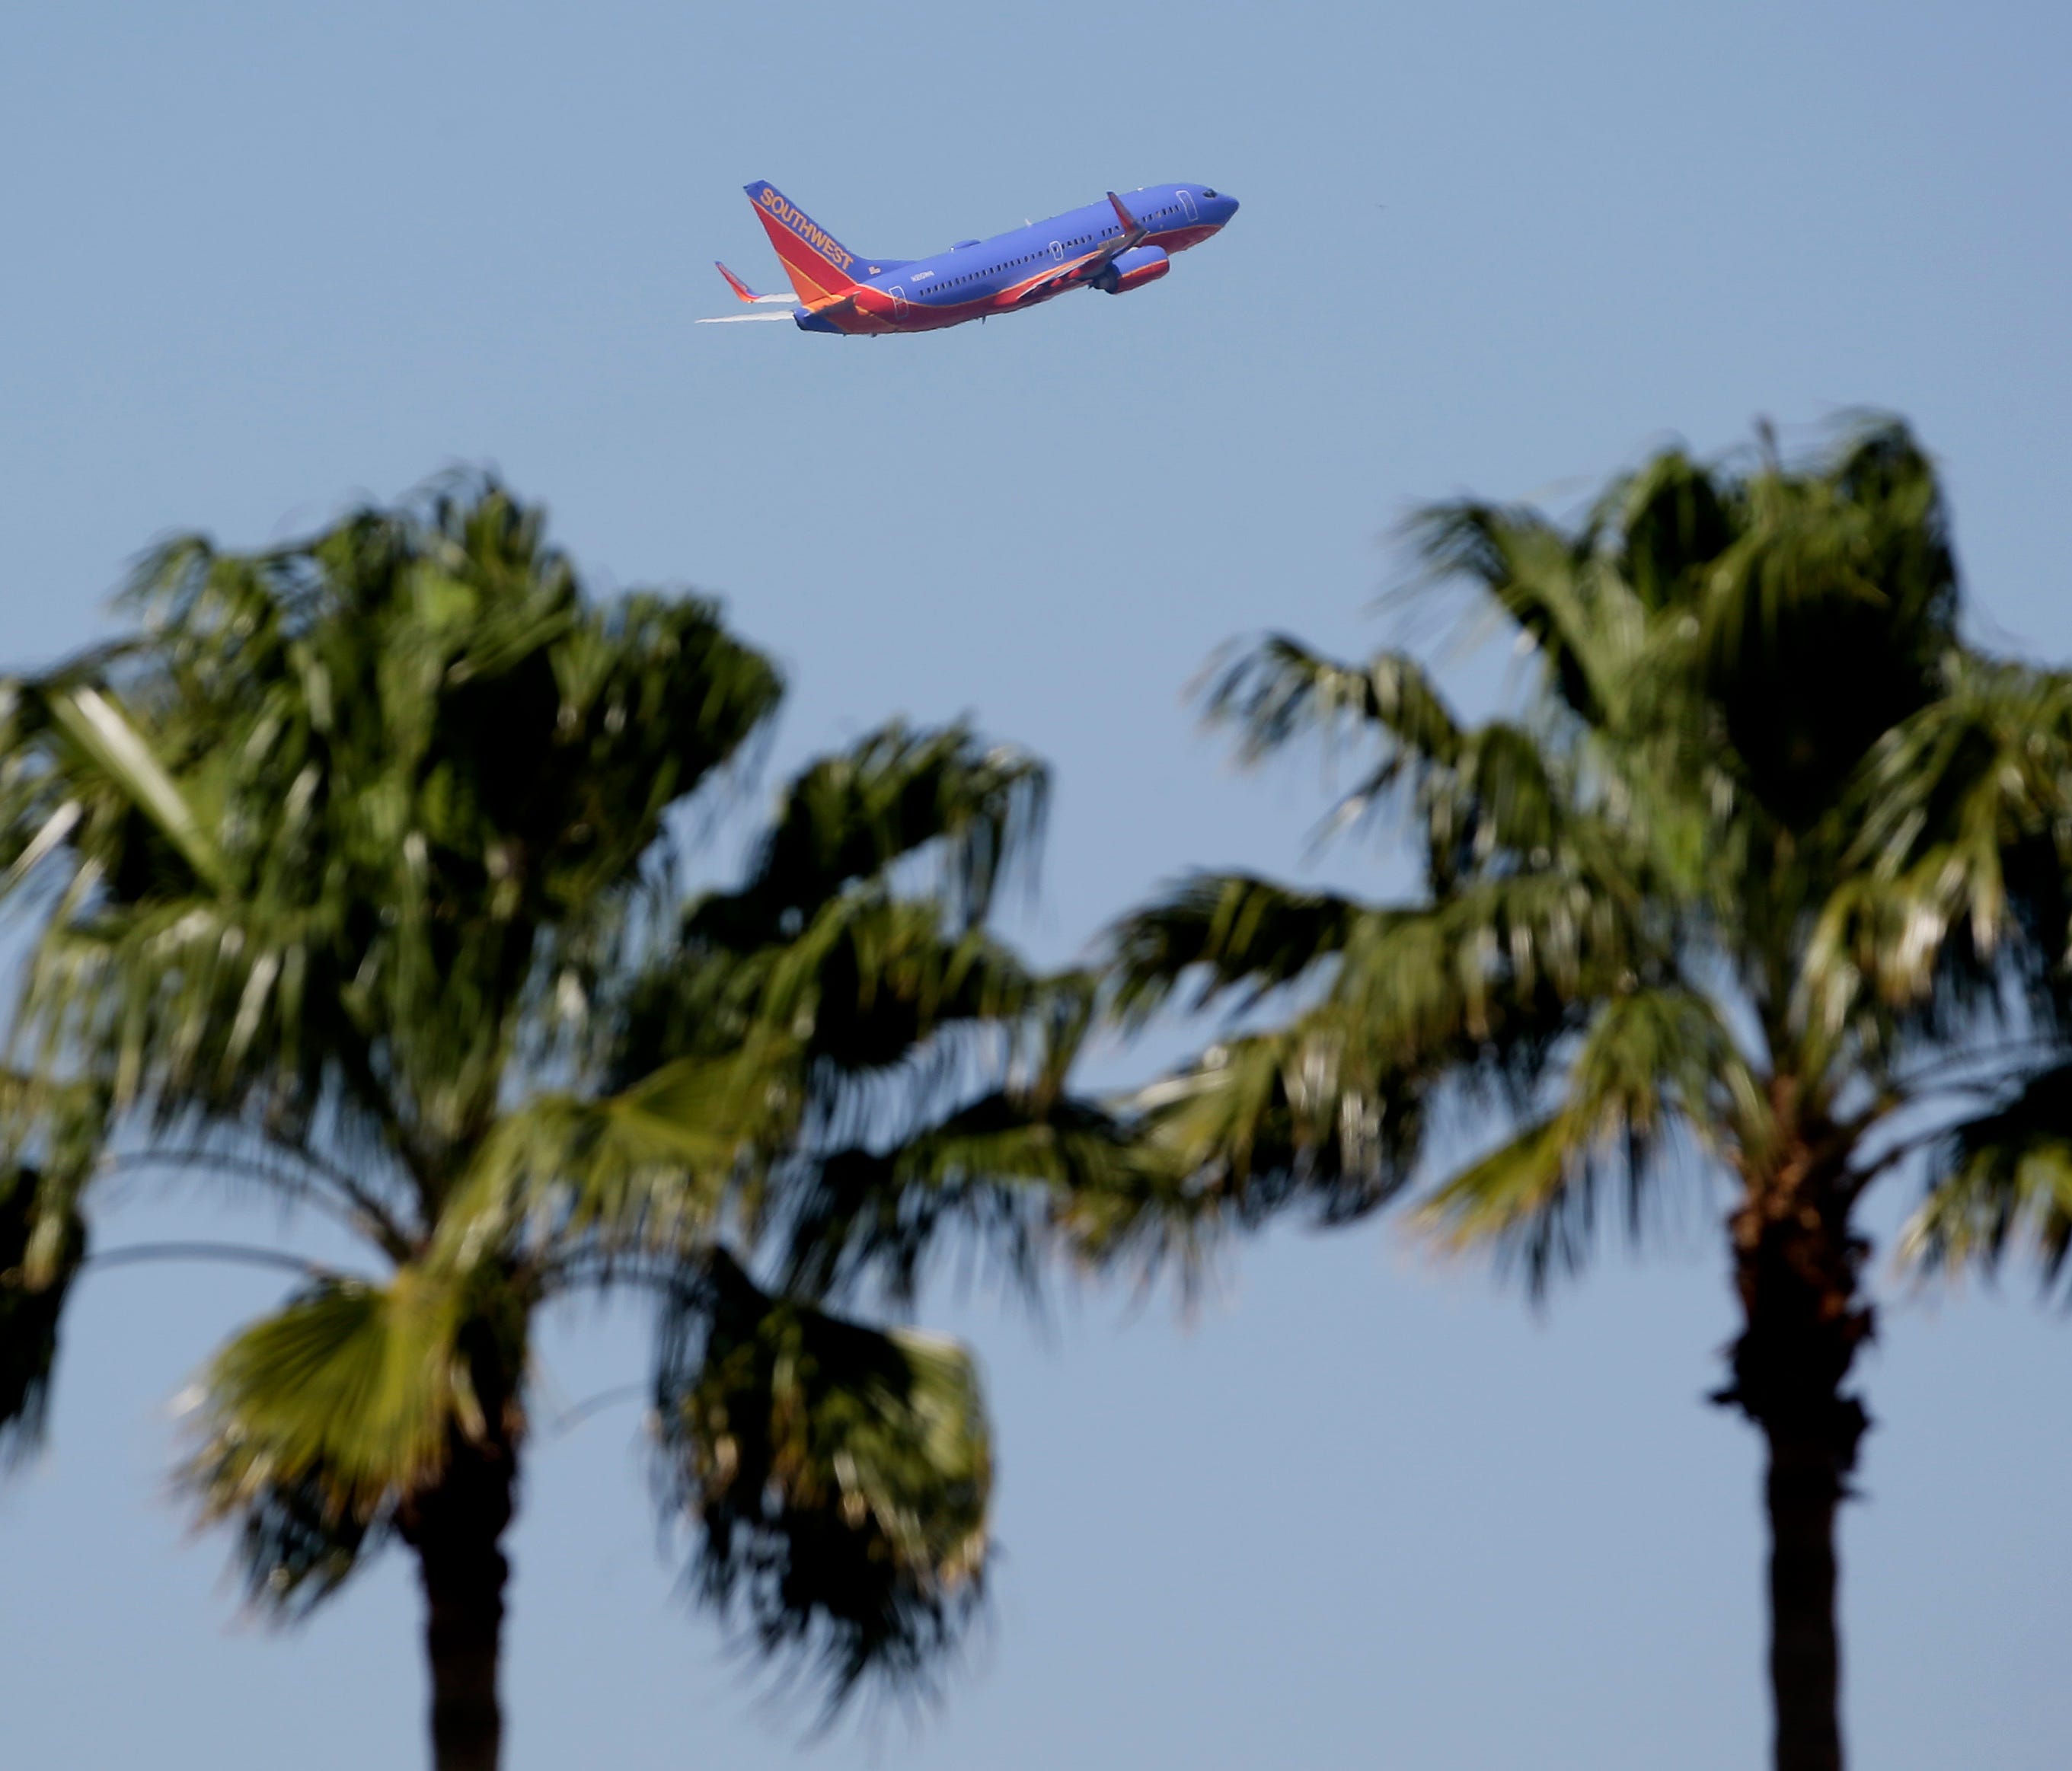 A Southwest Airlines jet takes off from Tampa International Airport on Feb. 27, 2016.